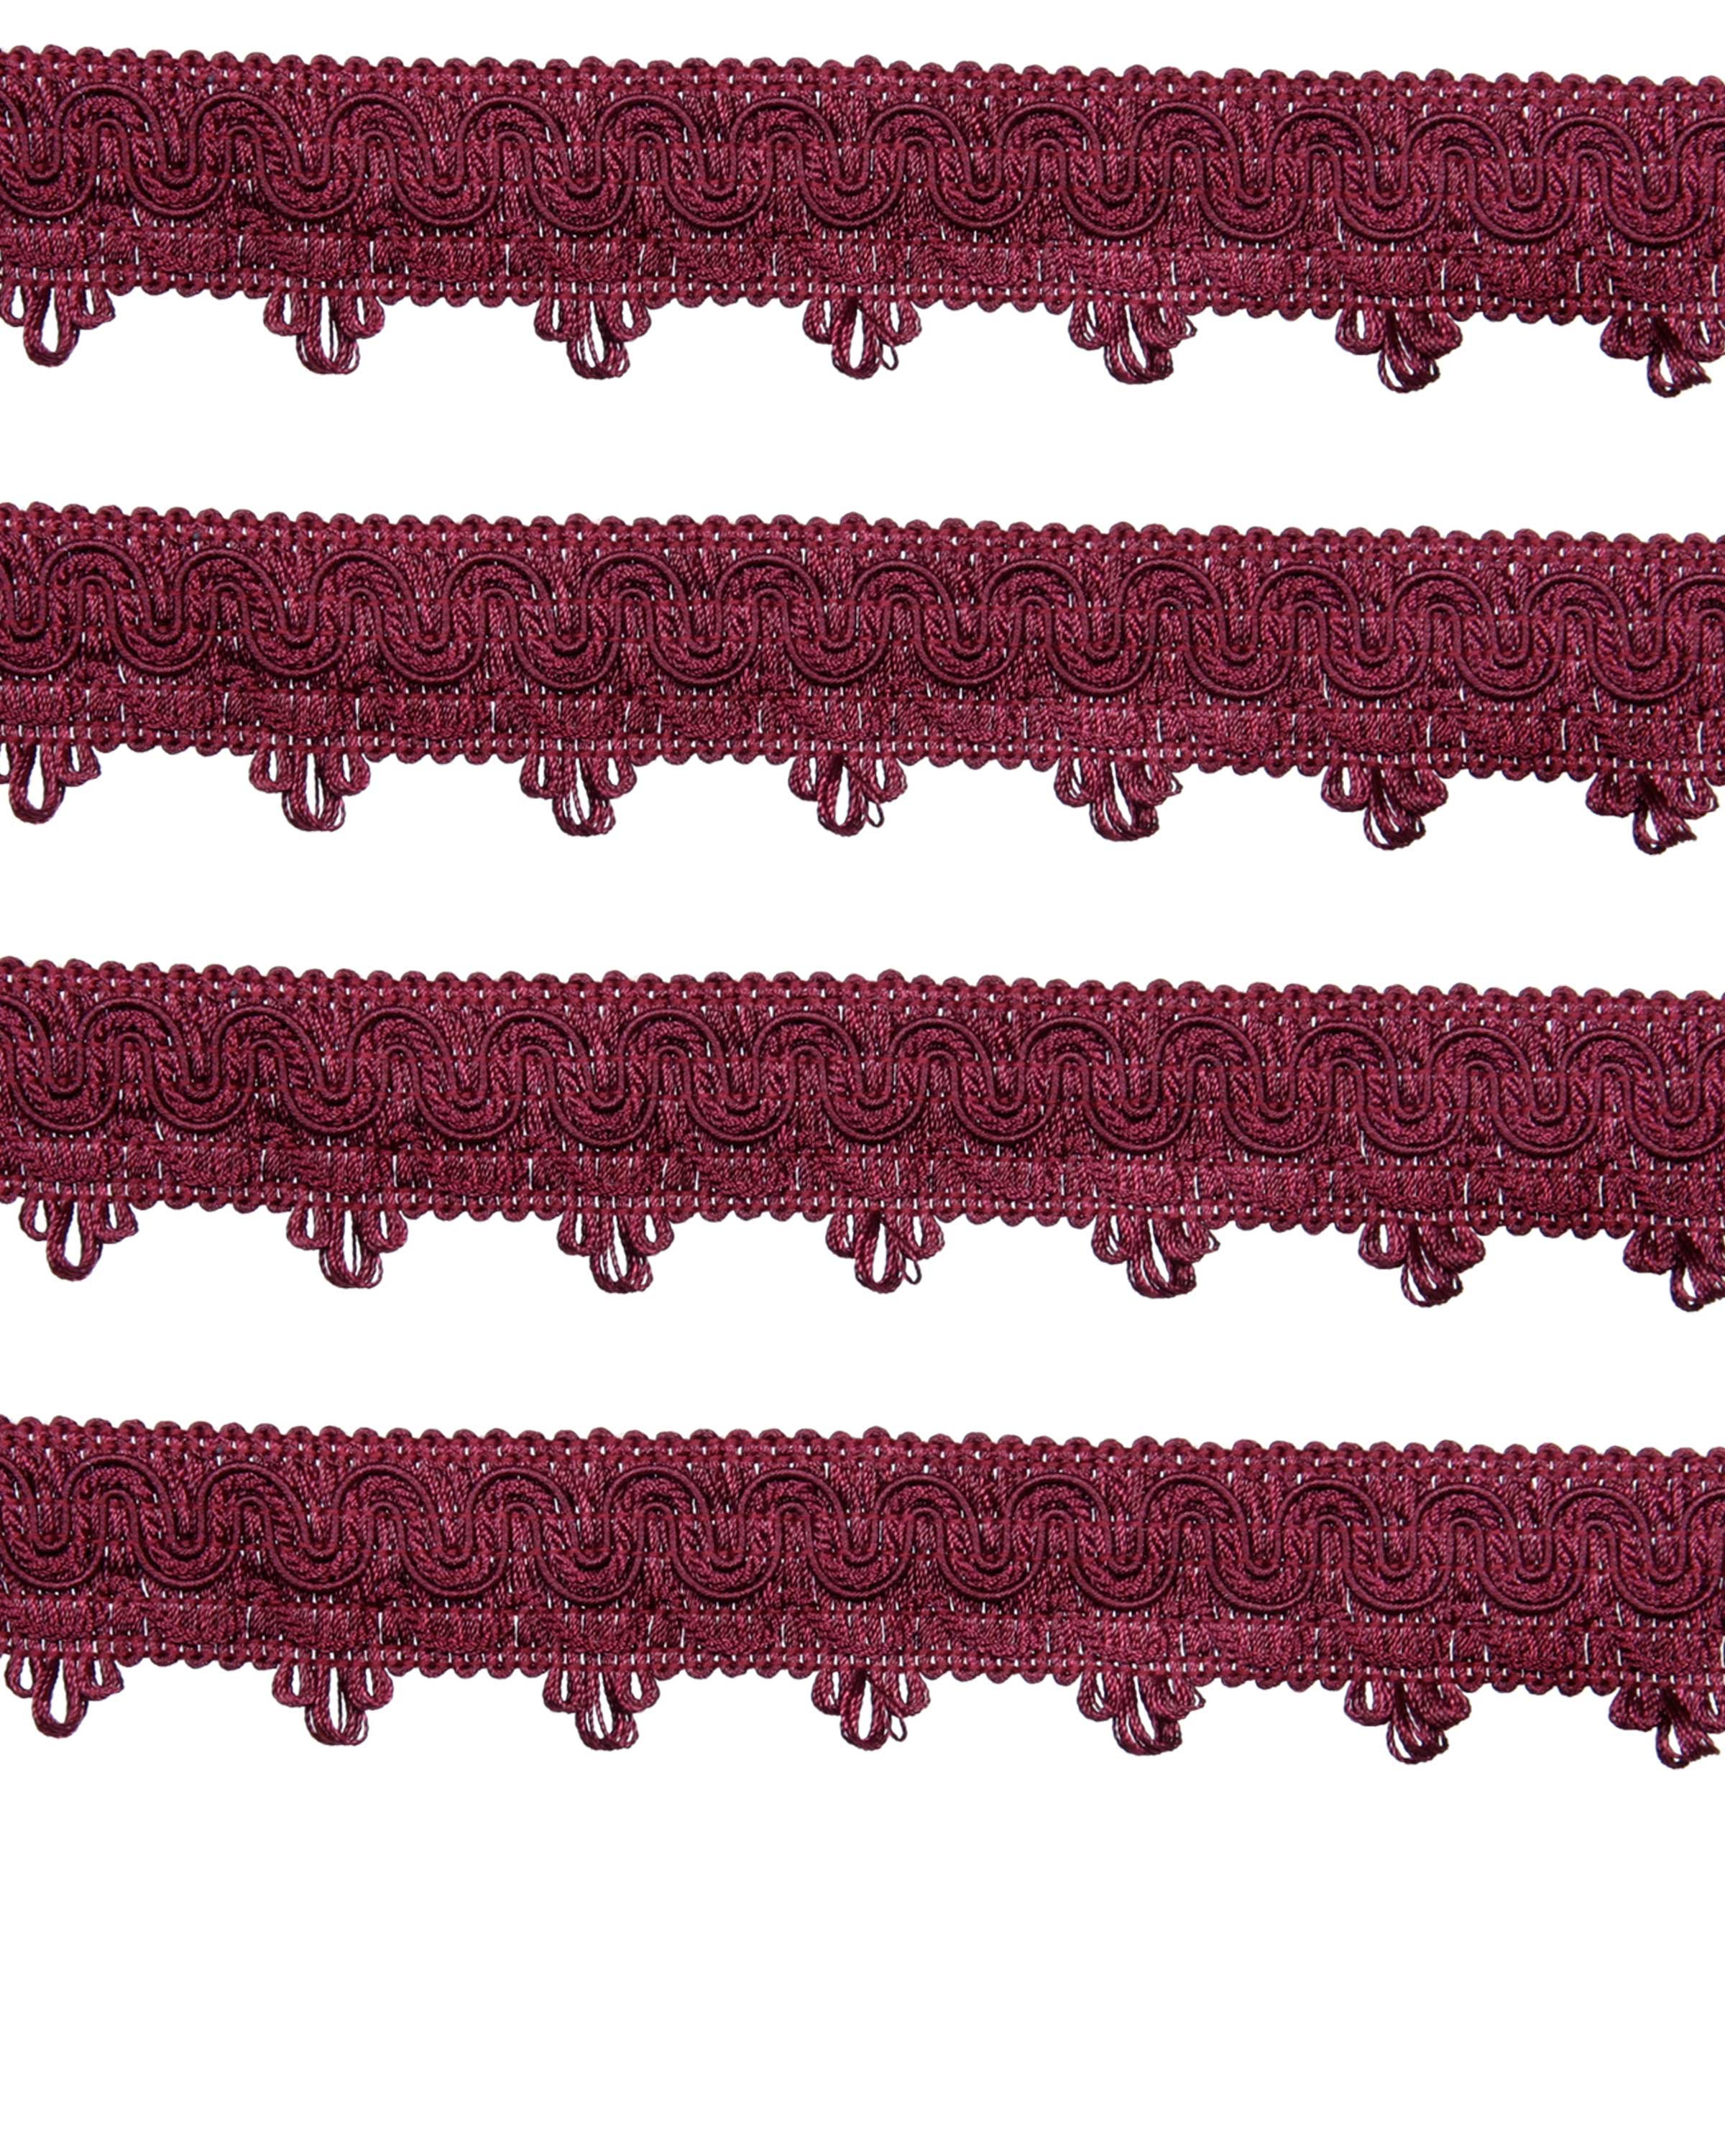 Ornate Scalloped Braid - Red Wine 45mm Price is for 5 metres